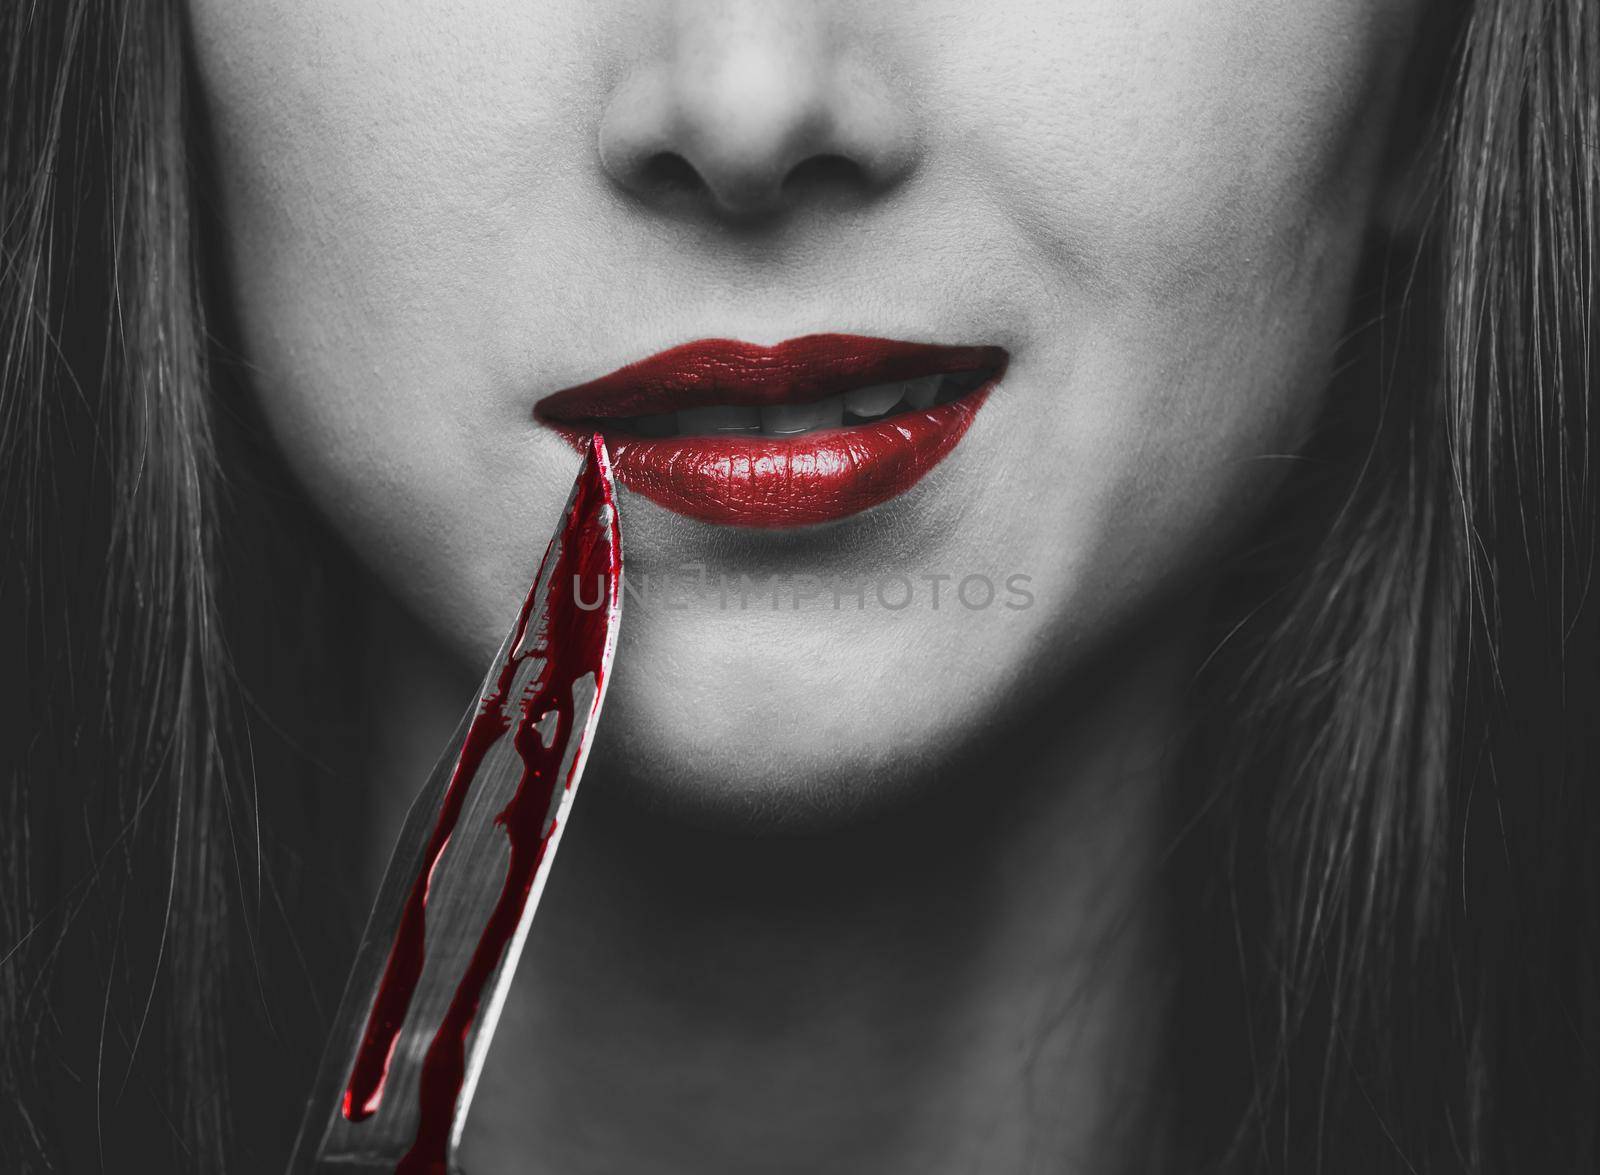 Smiling dangerous young woman with knife in blood. Halloween or horror theme. Black and white image with red elements